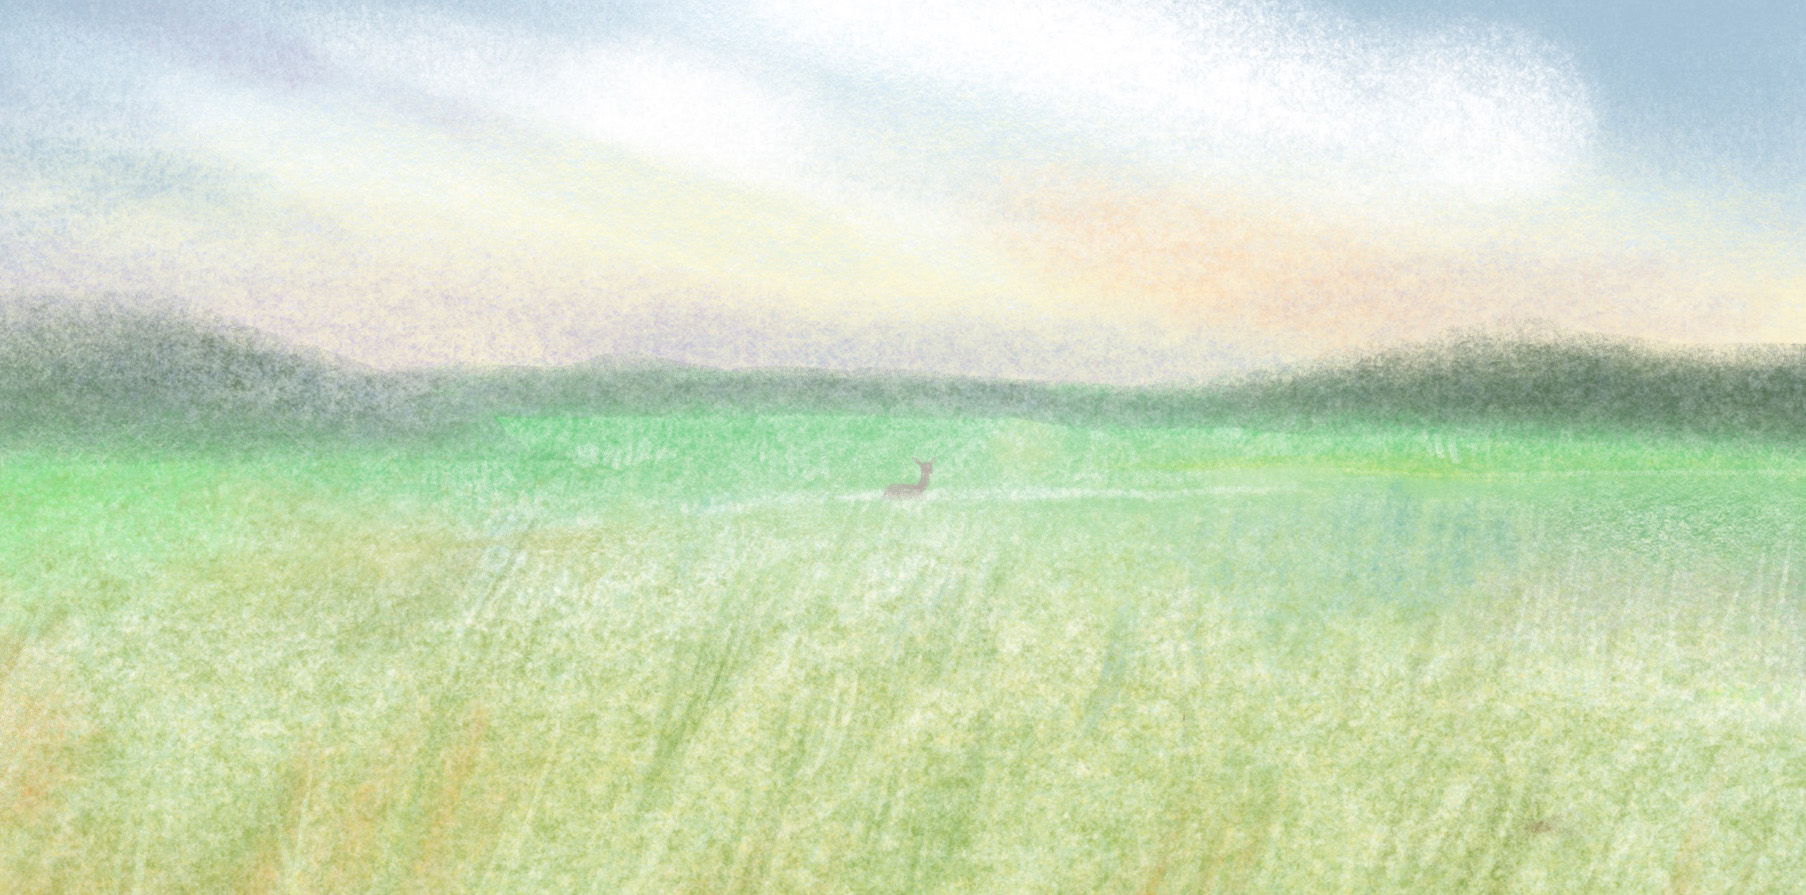 Deer and field drawn in color pencil